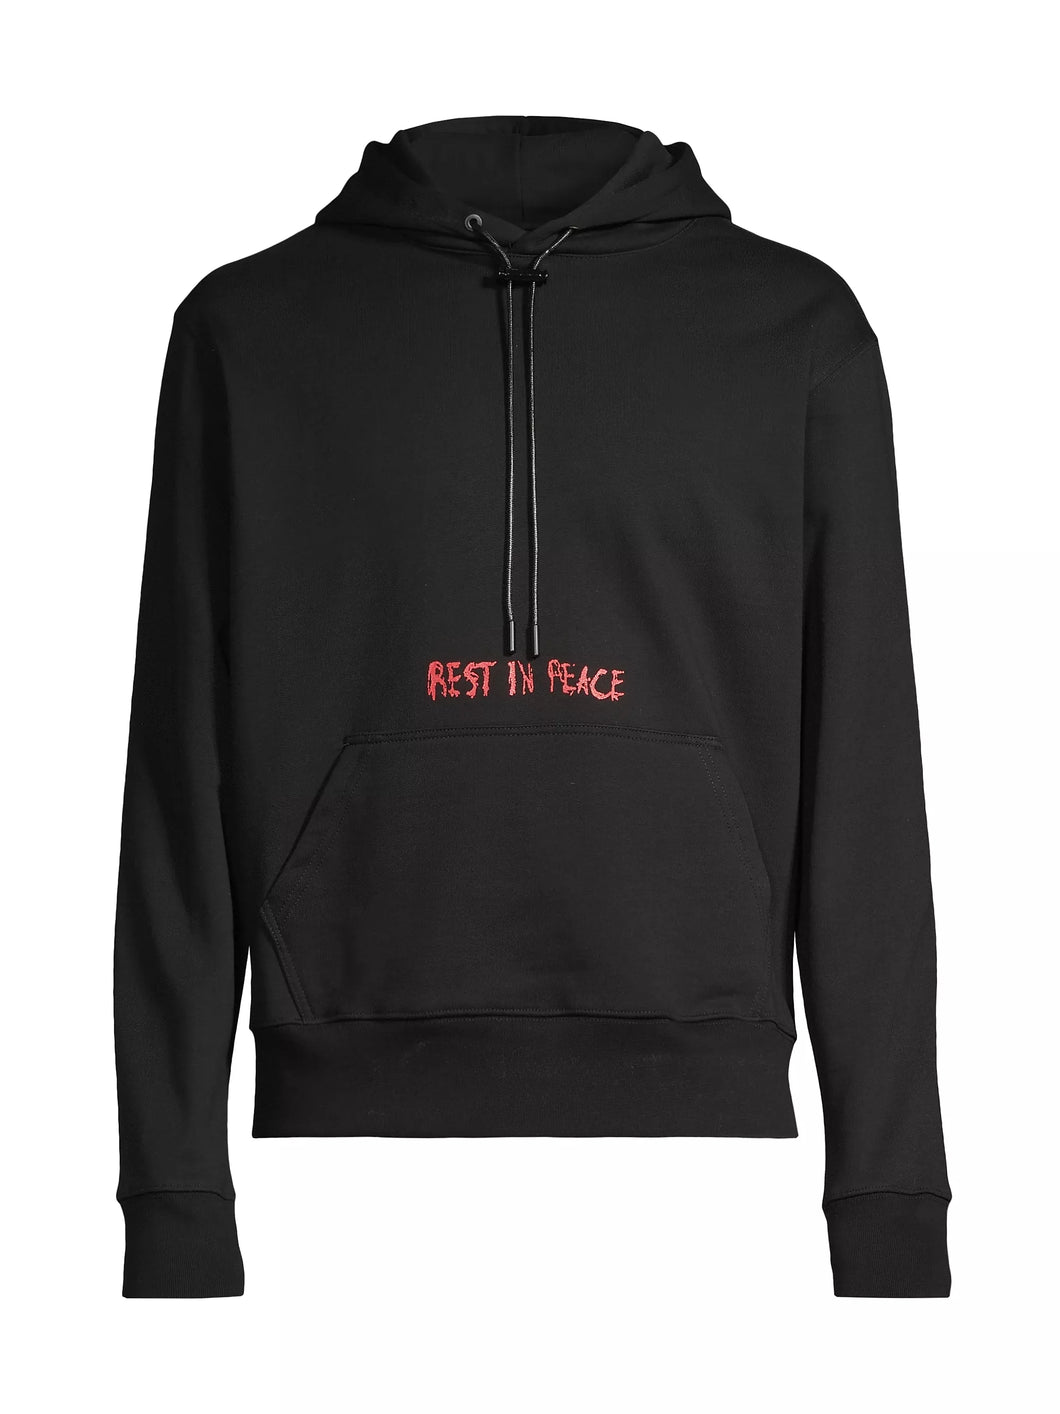 RTA DION RIP CROSS PULL OVER HOODIE